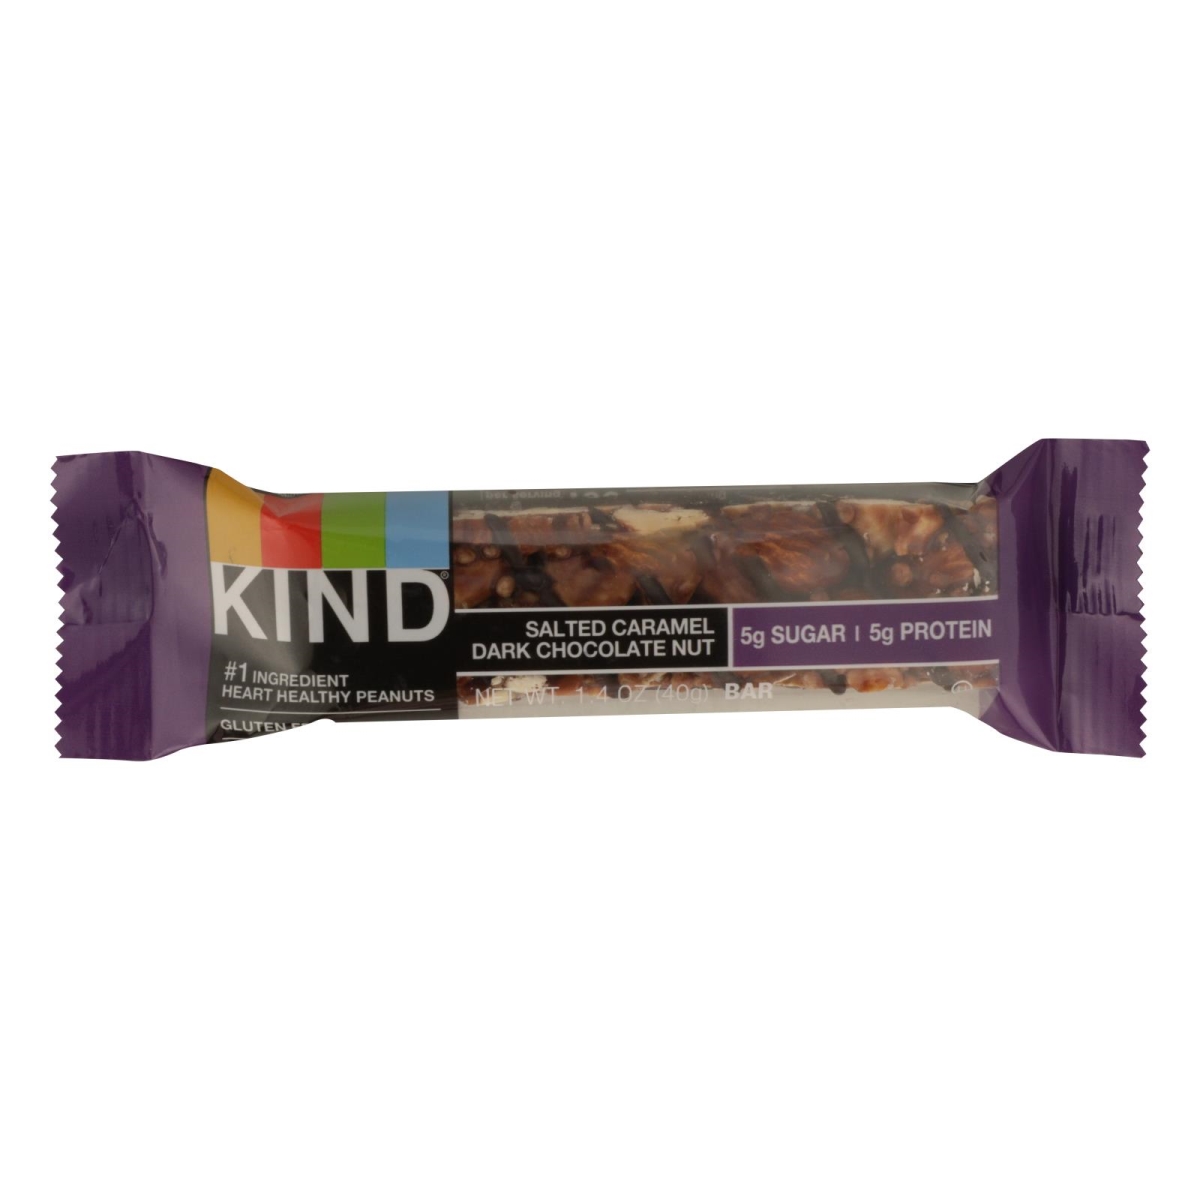 Picture of Kind HG2353779 1.4 oz Salted Caramel Dark Chocolate Bar - Case of 12